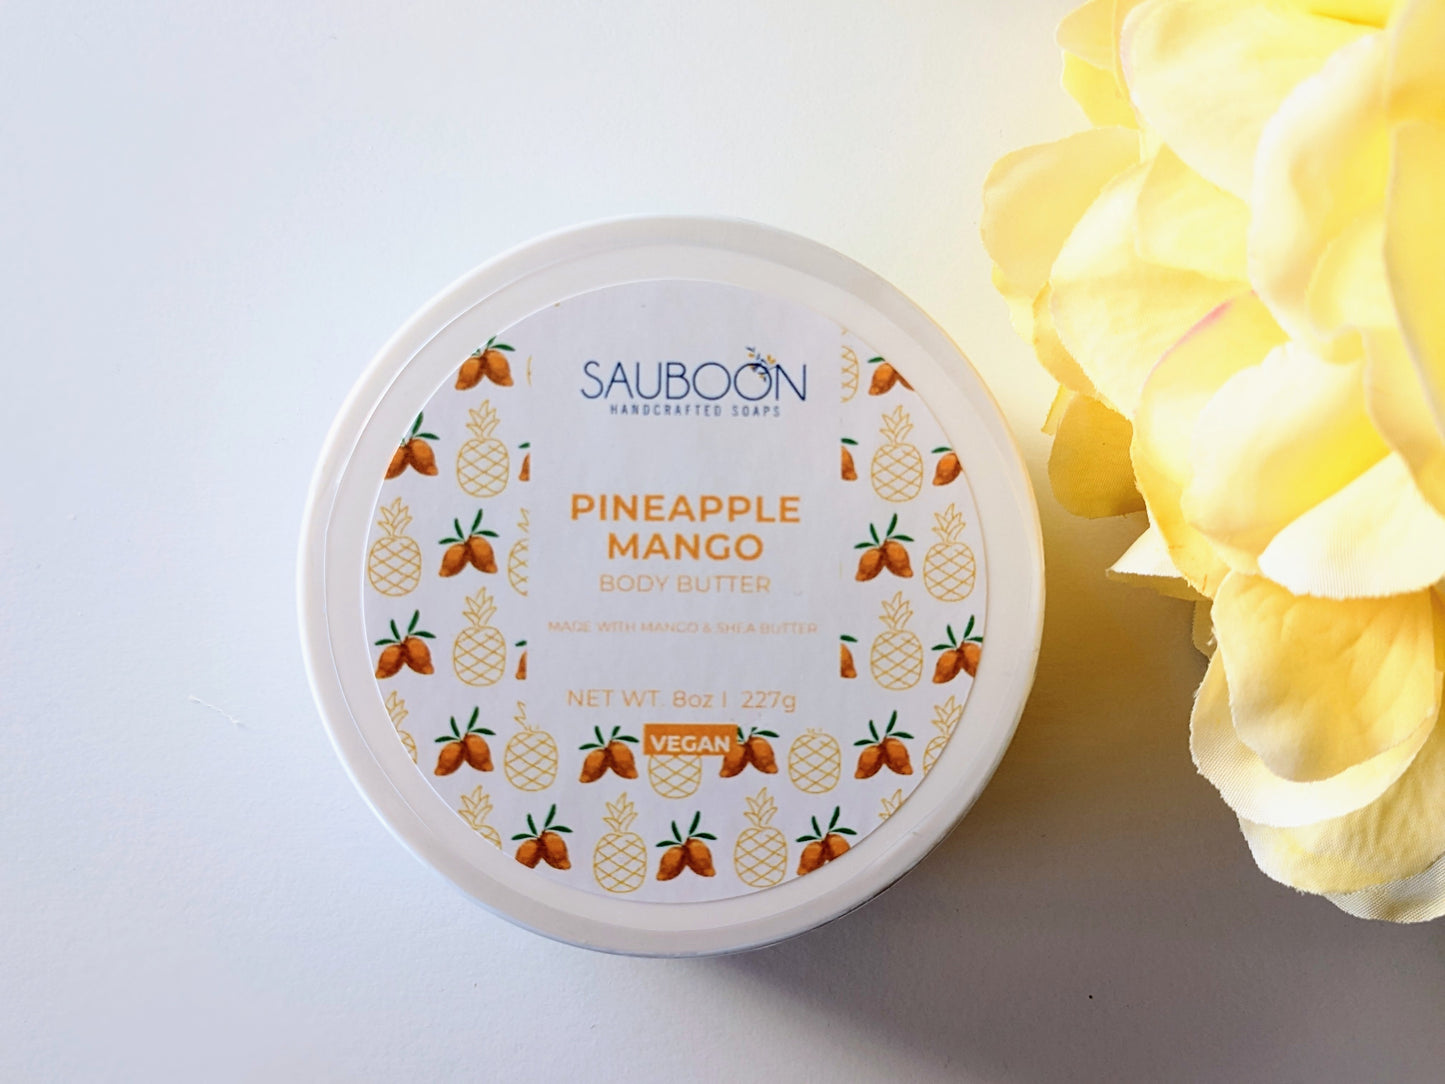 Made with shea butter & mango butter, which has wonderful skin hydrating properties.  Made in small batches in San Diego, California using the finest & luxurious ingredients.  Non-greasy and fast absorbant.